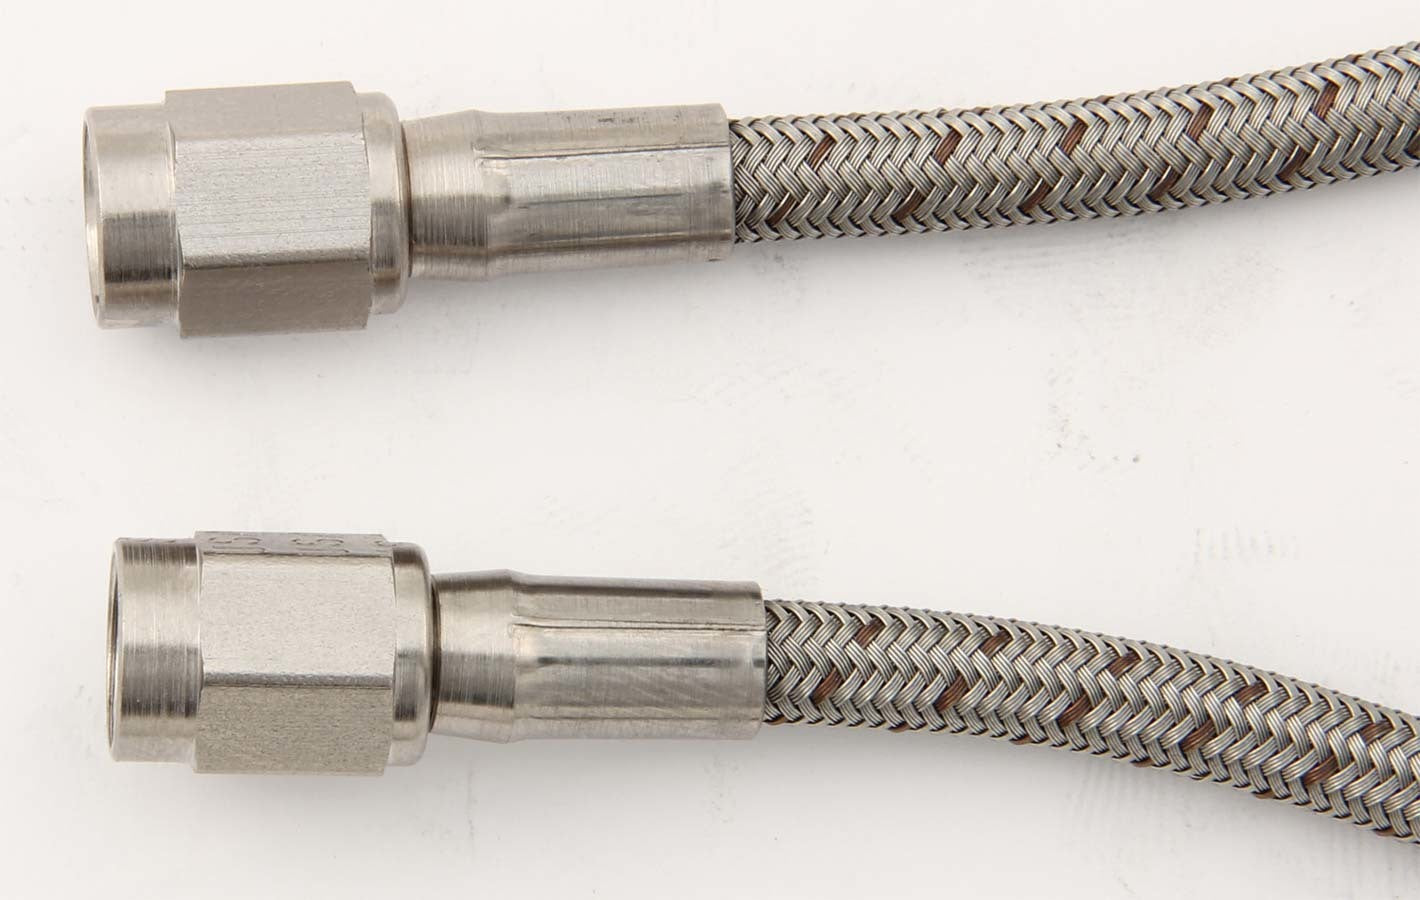 Brake Hose - 72 in Long - 4 AN Hose - 4 AN Straight Female to 4 AN Straight Female - Braided Stainless - PTFE Lined - Each